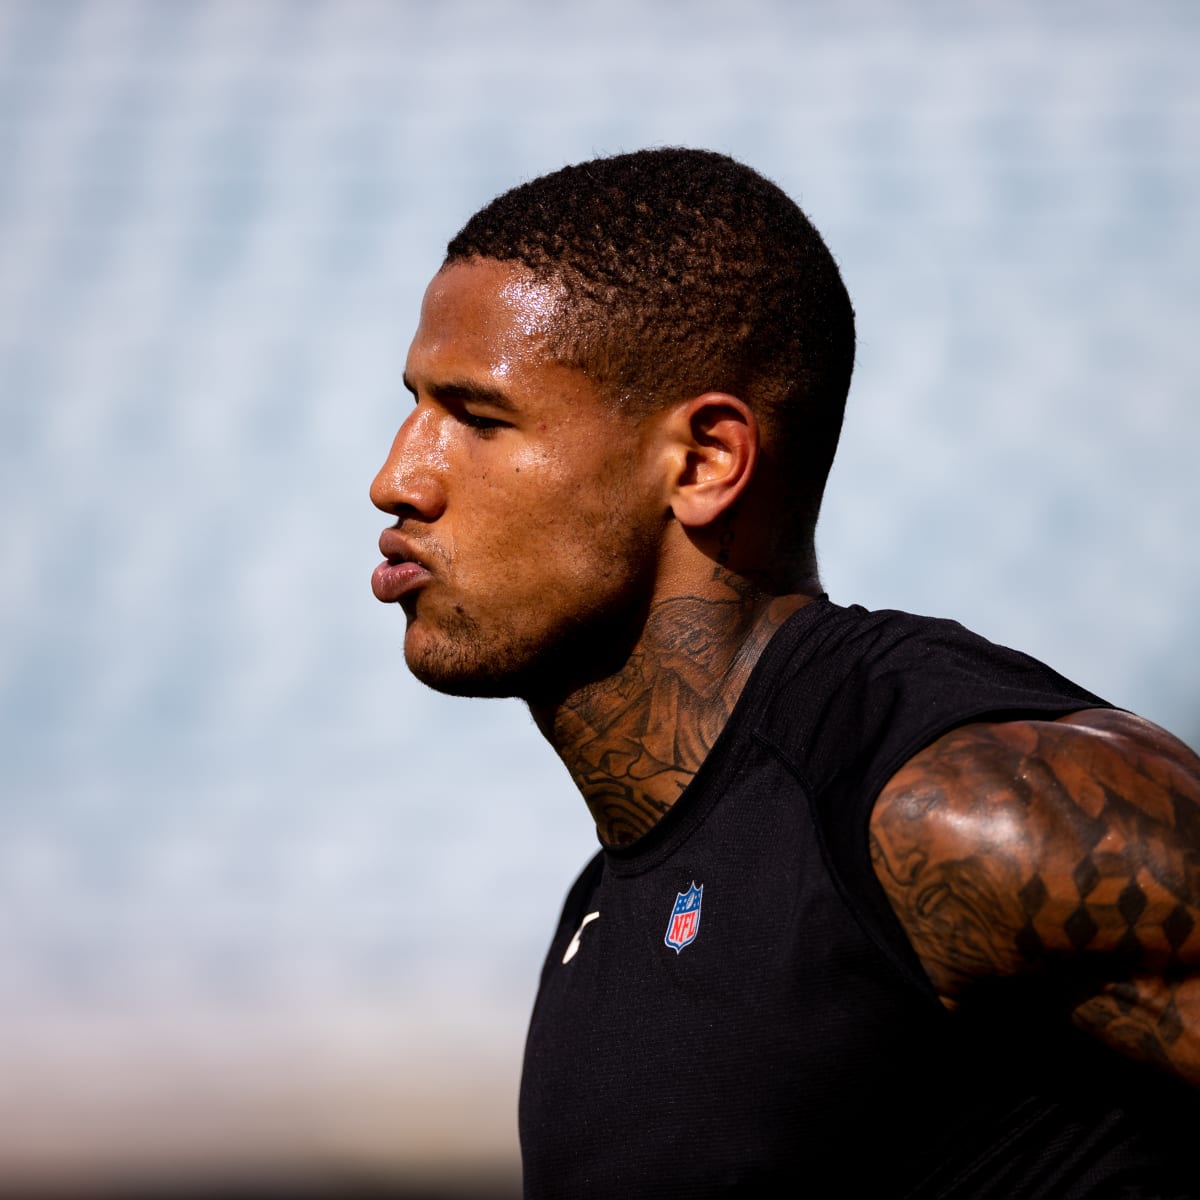 Giants acquire Pro Bowl tight end Darren Waller in blockbuster trade with  Raiders: report